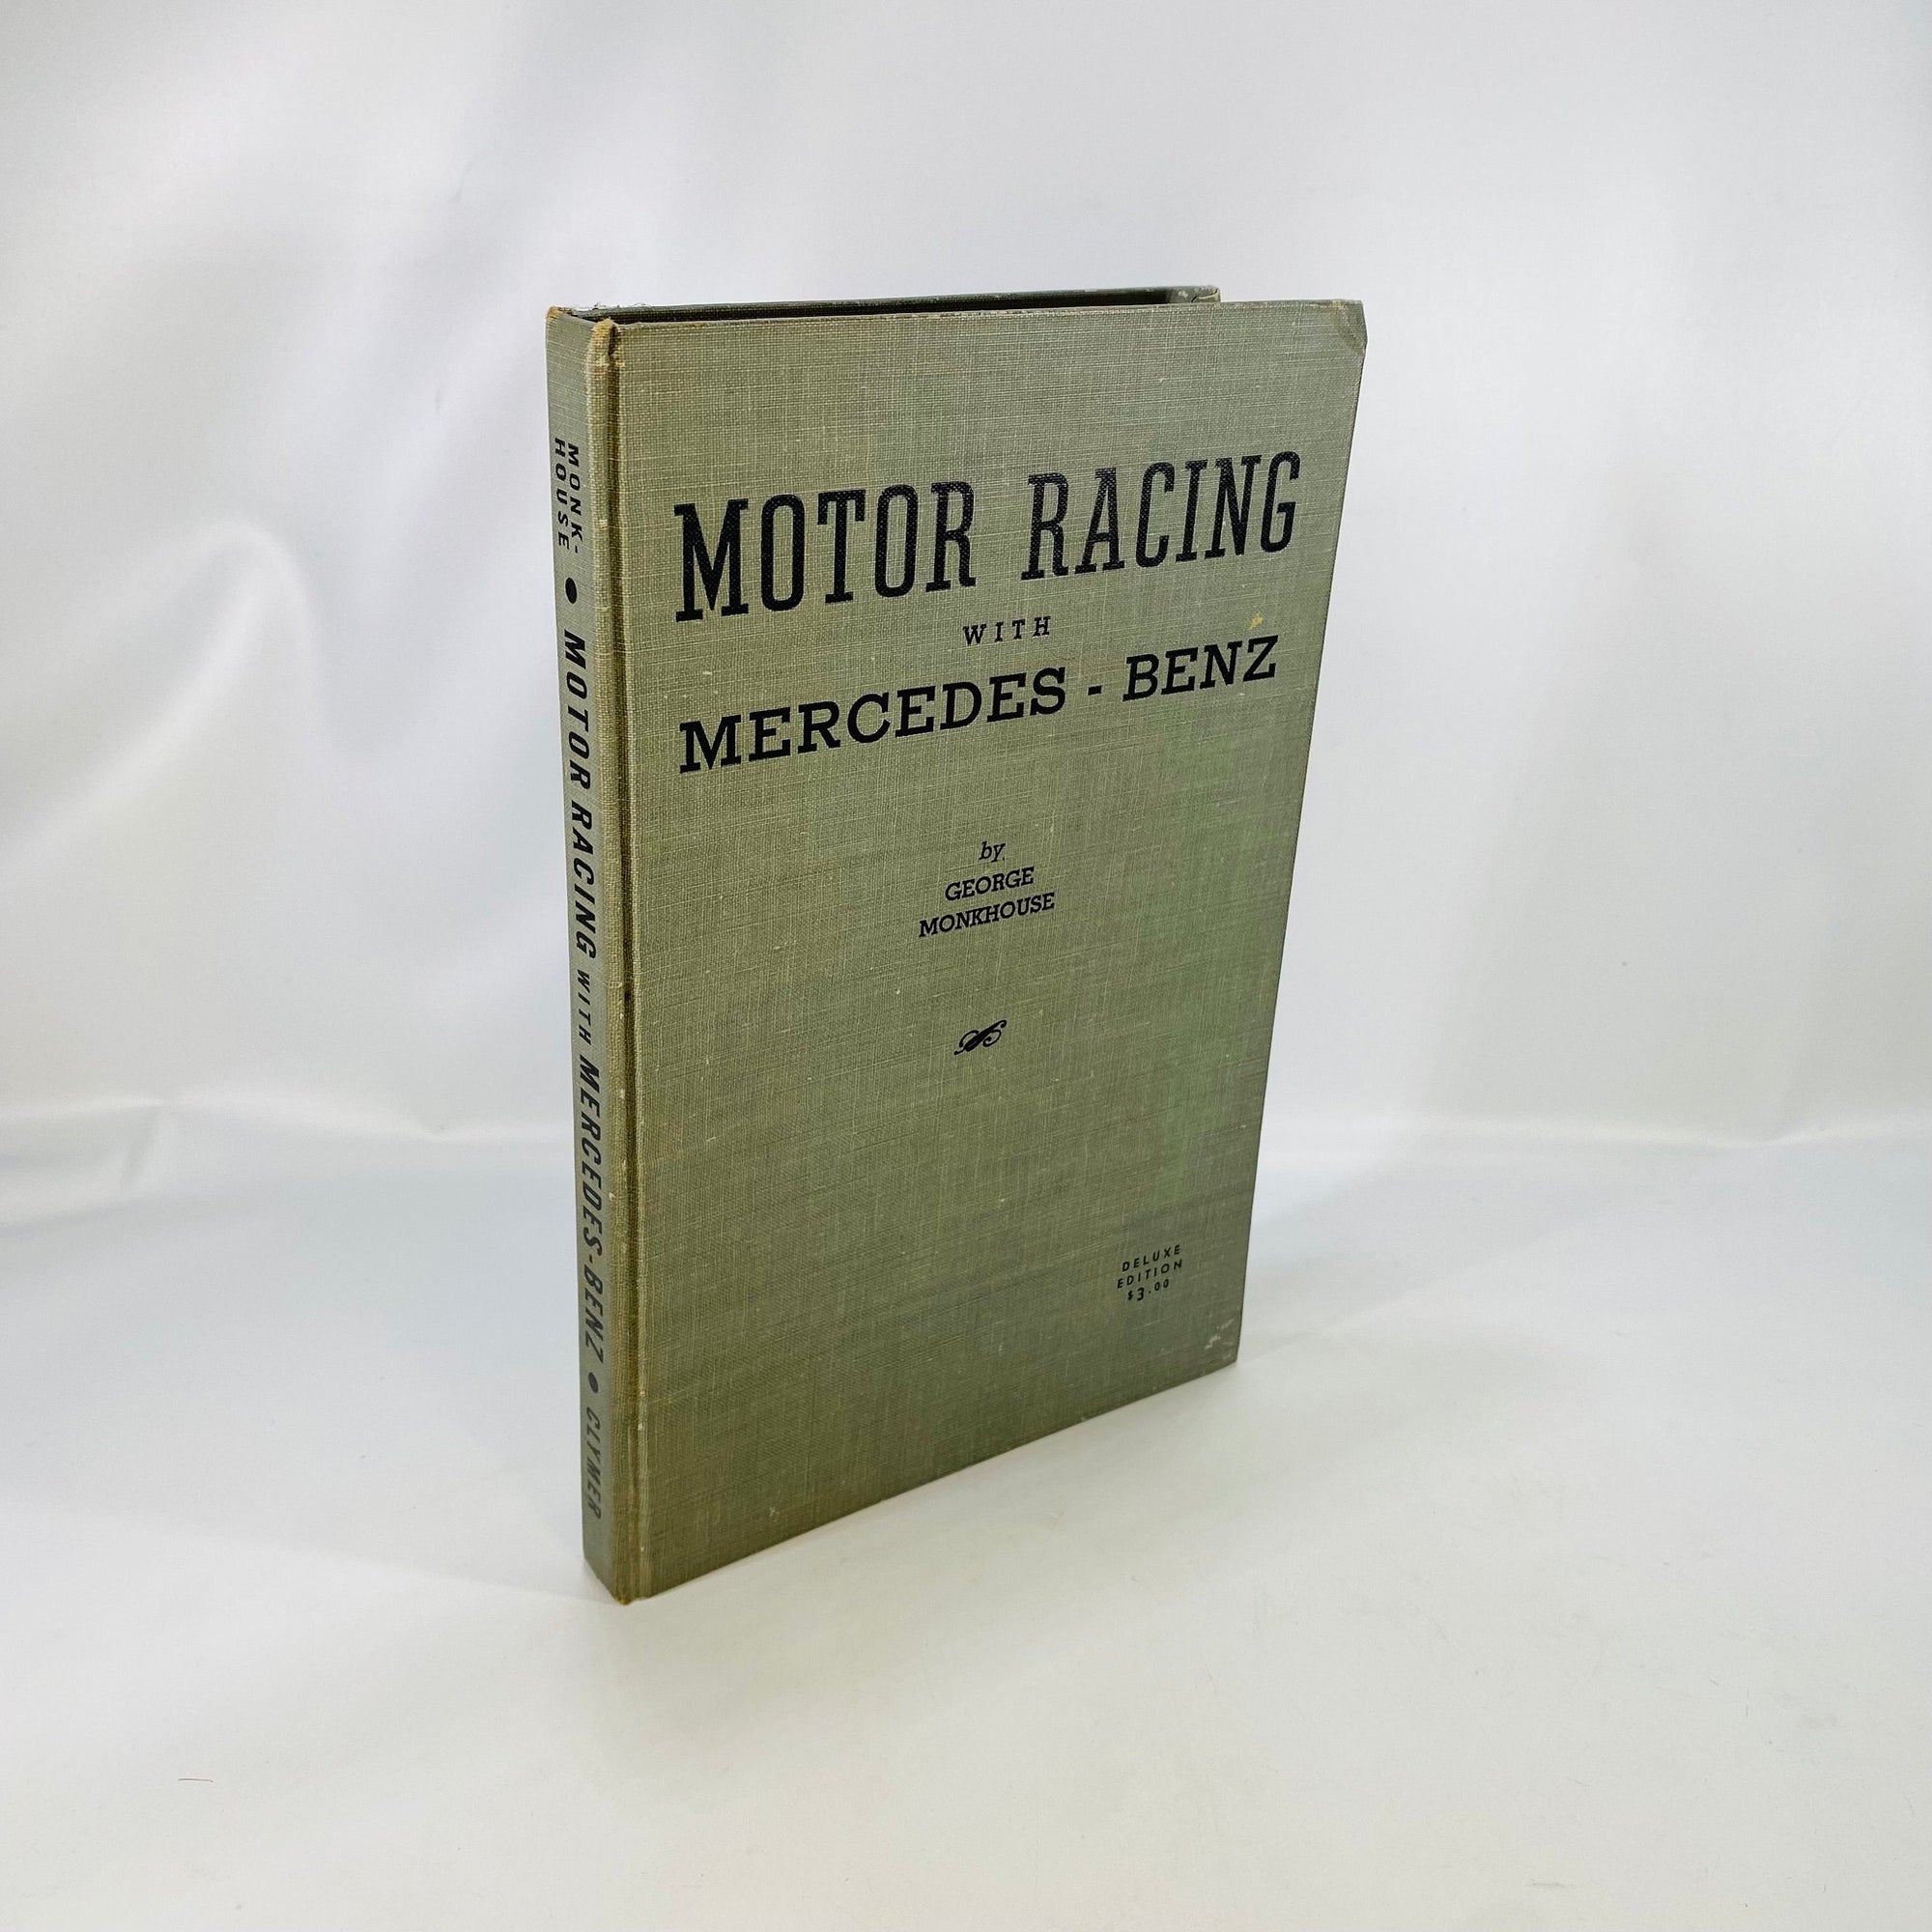 Motor Racing with Mercedes-Benz by George Monkhouse 1945 published by Floyd Clymer